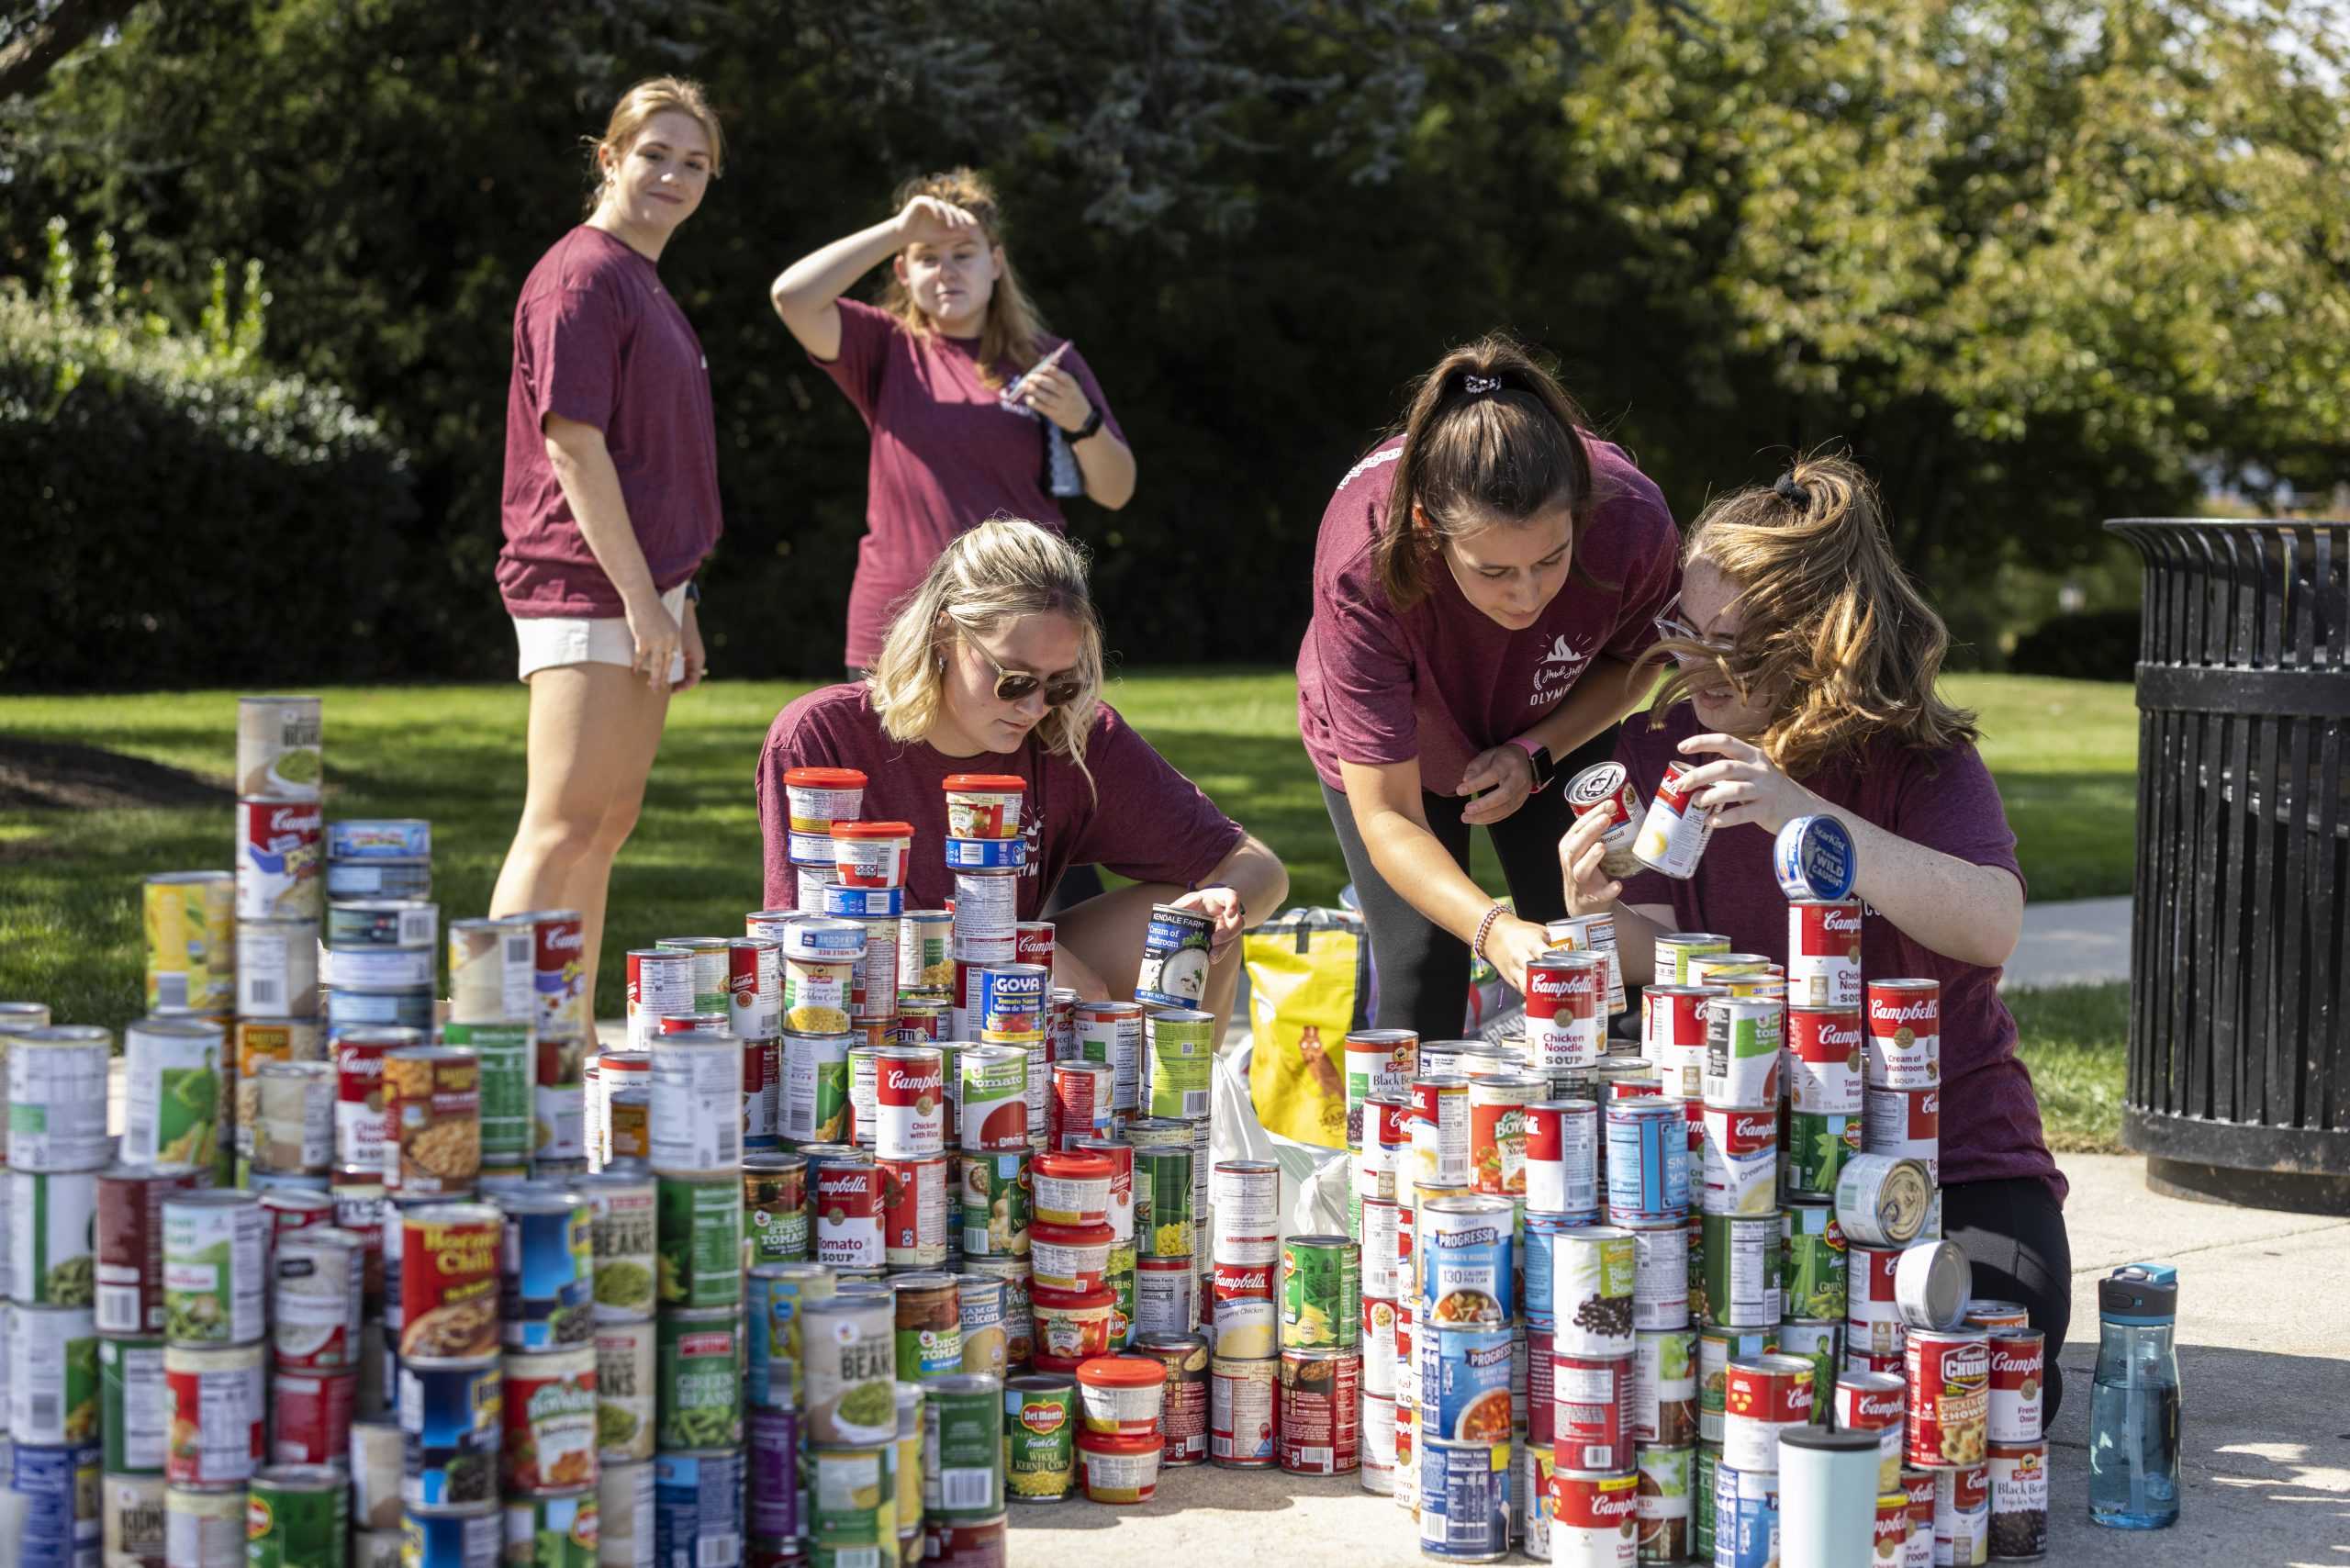 Members of greek organizations collect cans at Curran Lawn on Oct. 2.
PHOTOS: SPENCER RAIN ’22/THE HAWK